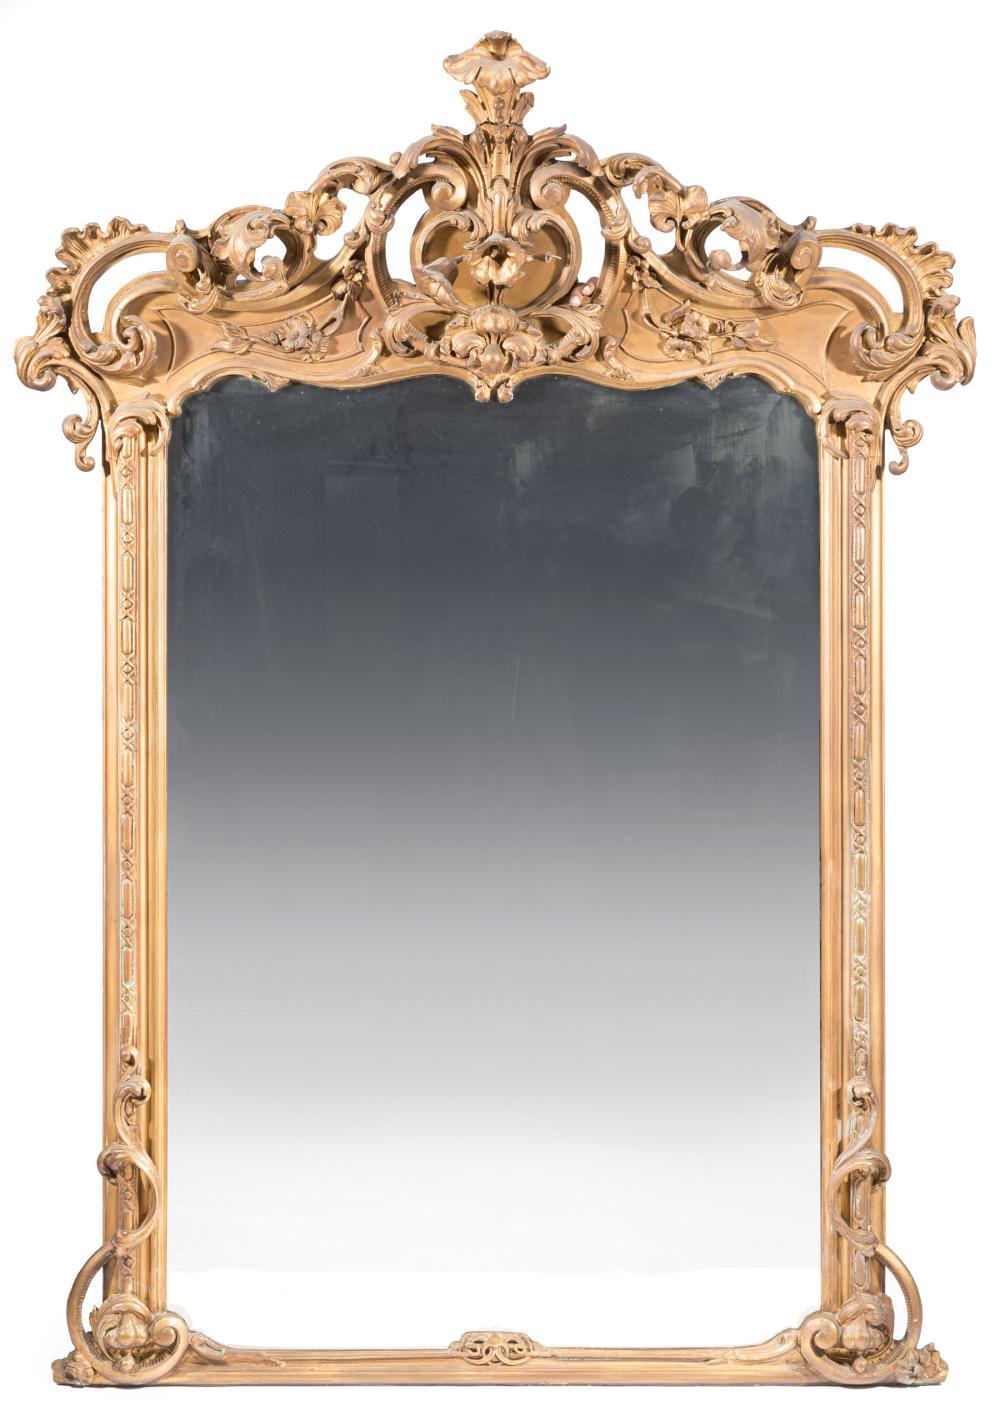 ROCOCO REVIVAL CARVED AND GILT